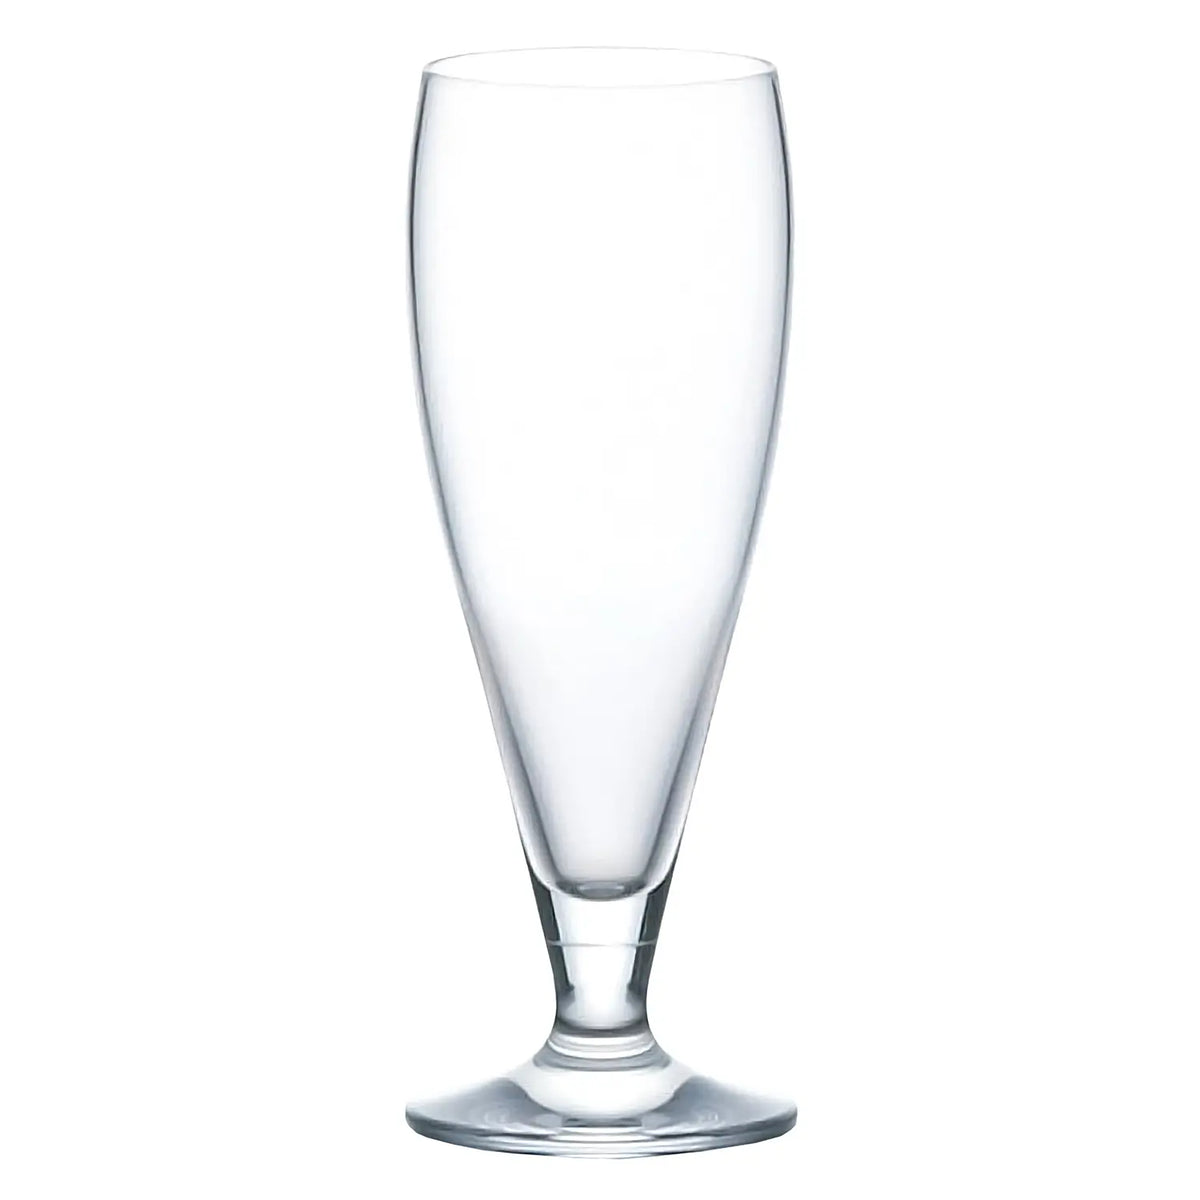 ADERIA Soda-Lime Glass Beer Glass 360ml Set of 3